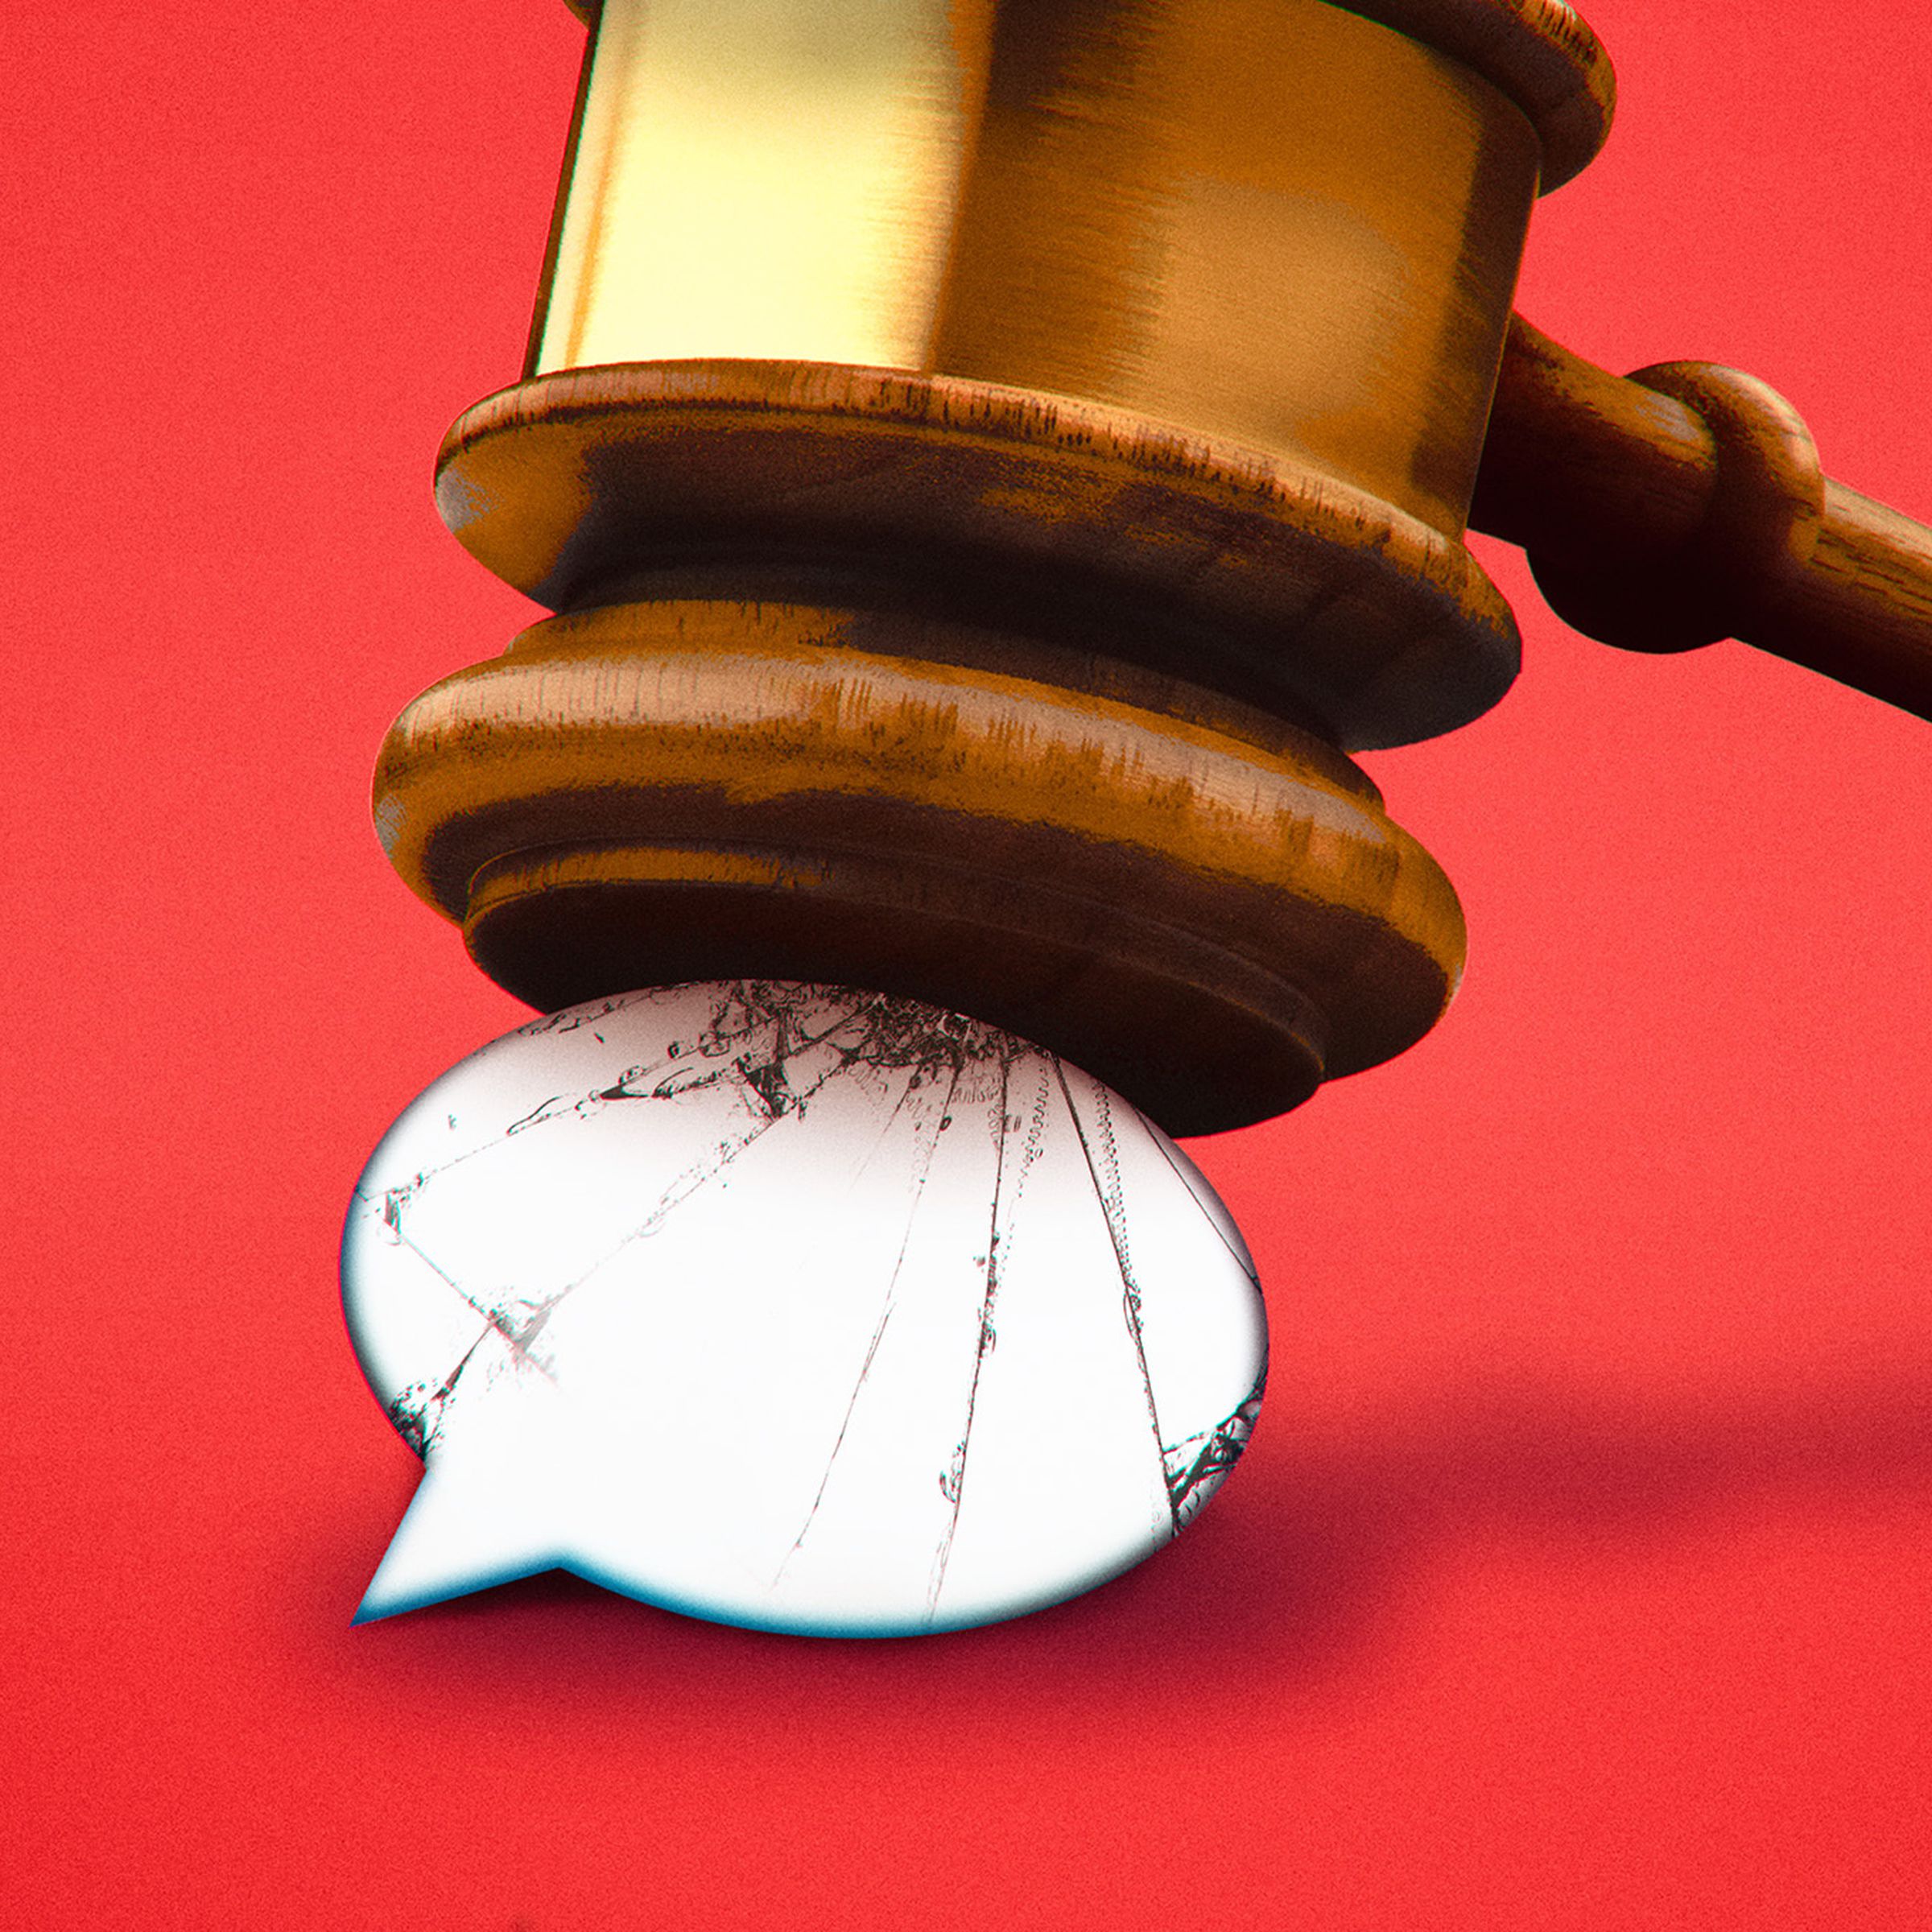 A speech bubble being crushed by a gavel against a red background